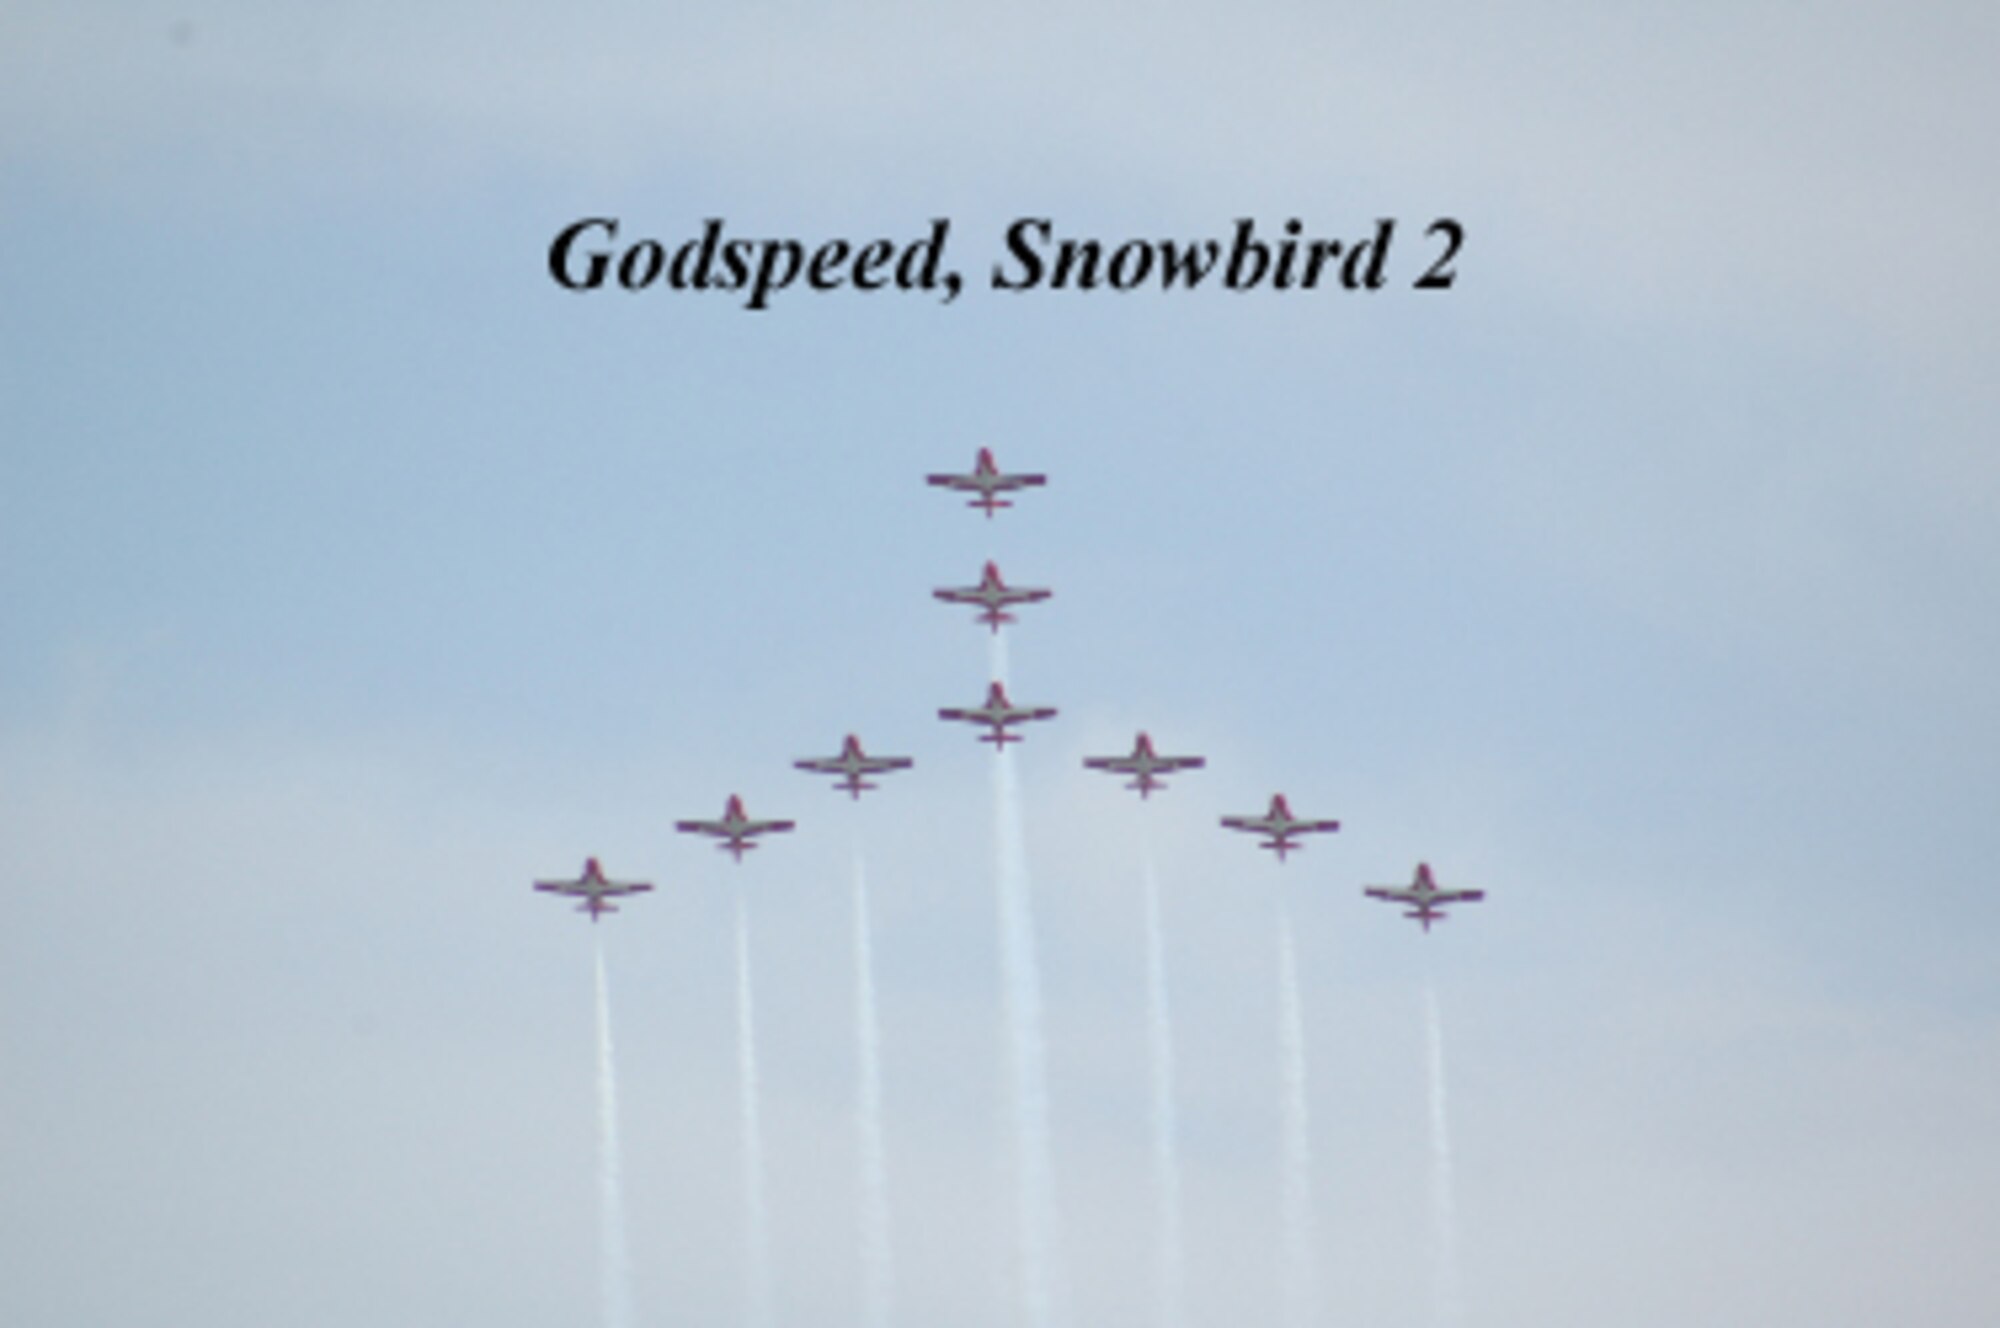 The Canadian Snowbirds Aerial Demonstration Team perform their signature Canada Goose formation during practice over Malmstrom Air Force Base May 19. (U.S. Air Force photo by Airman 1st Class Emerald Ralston)